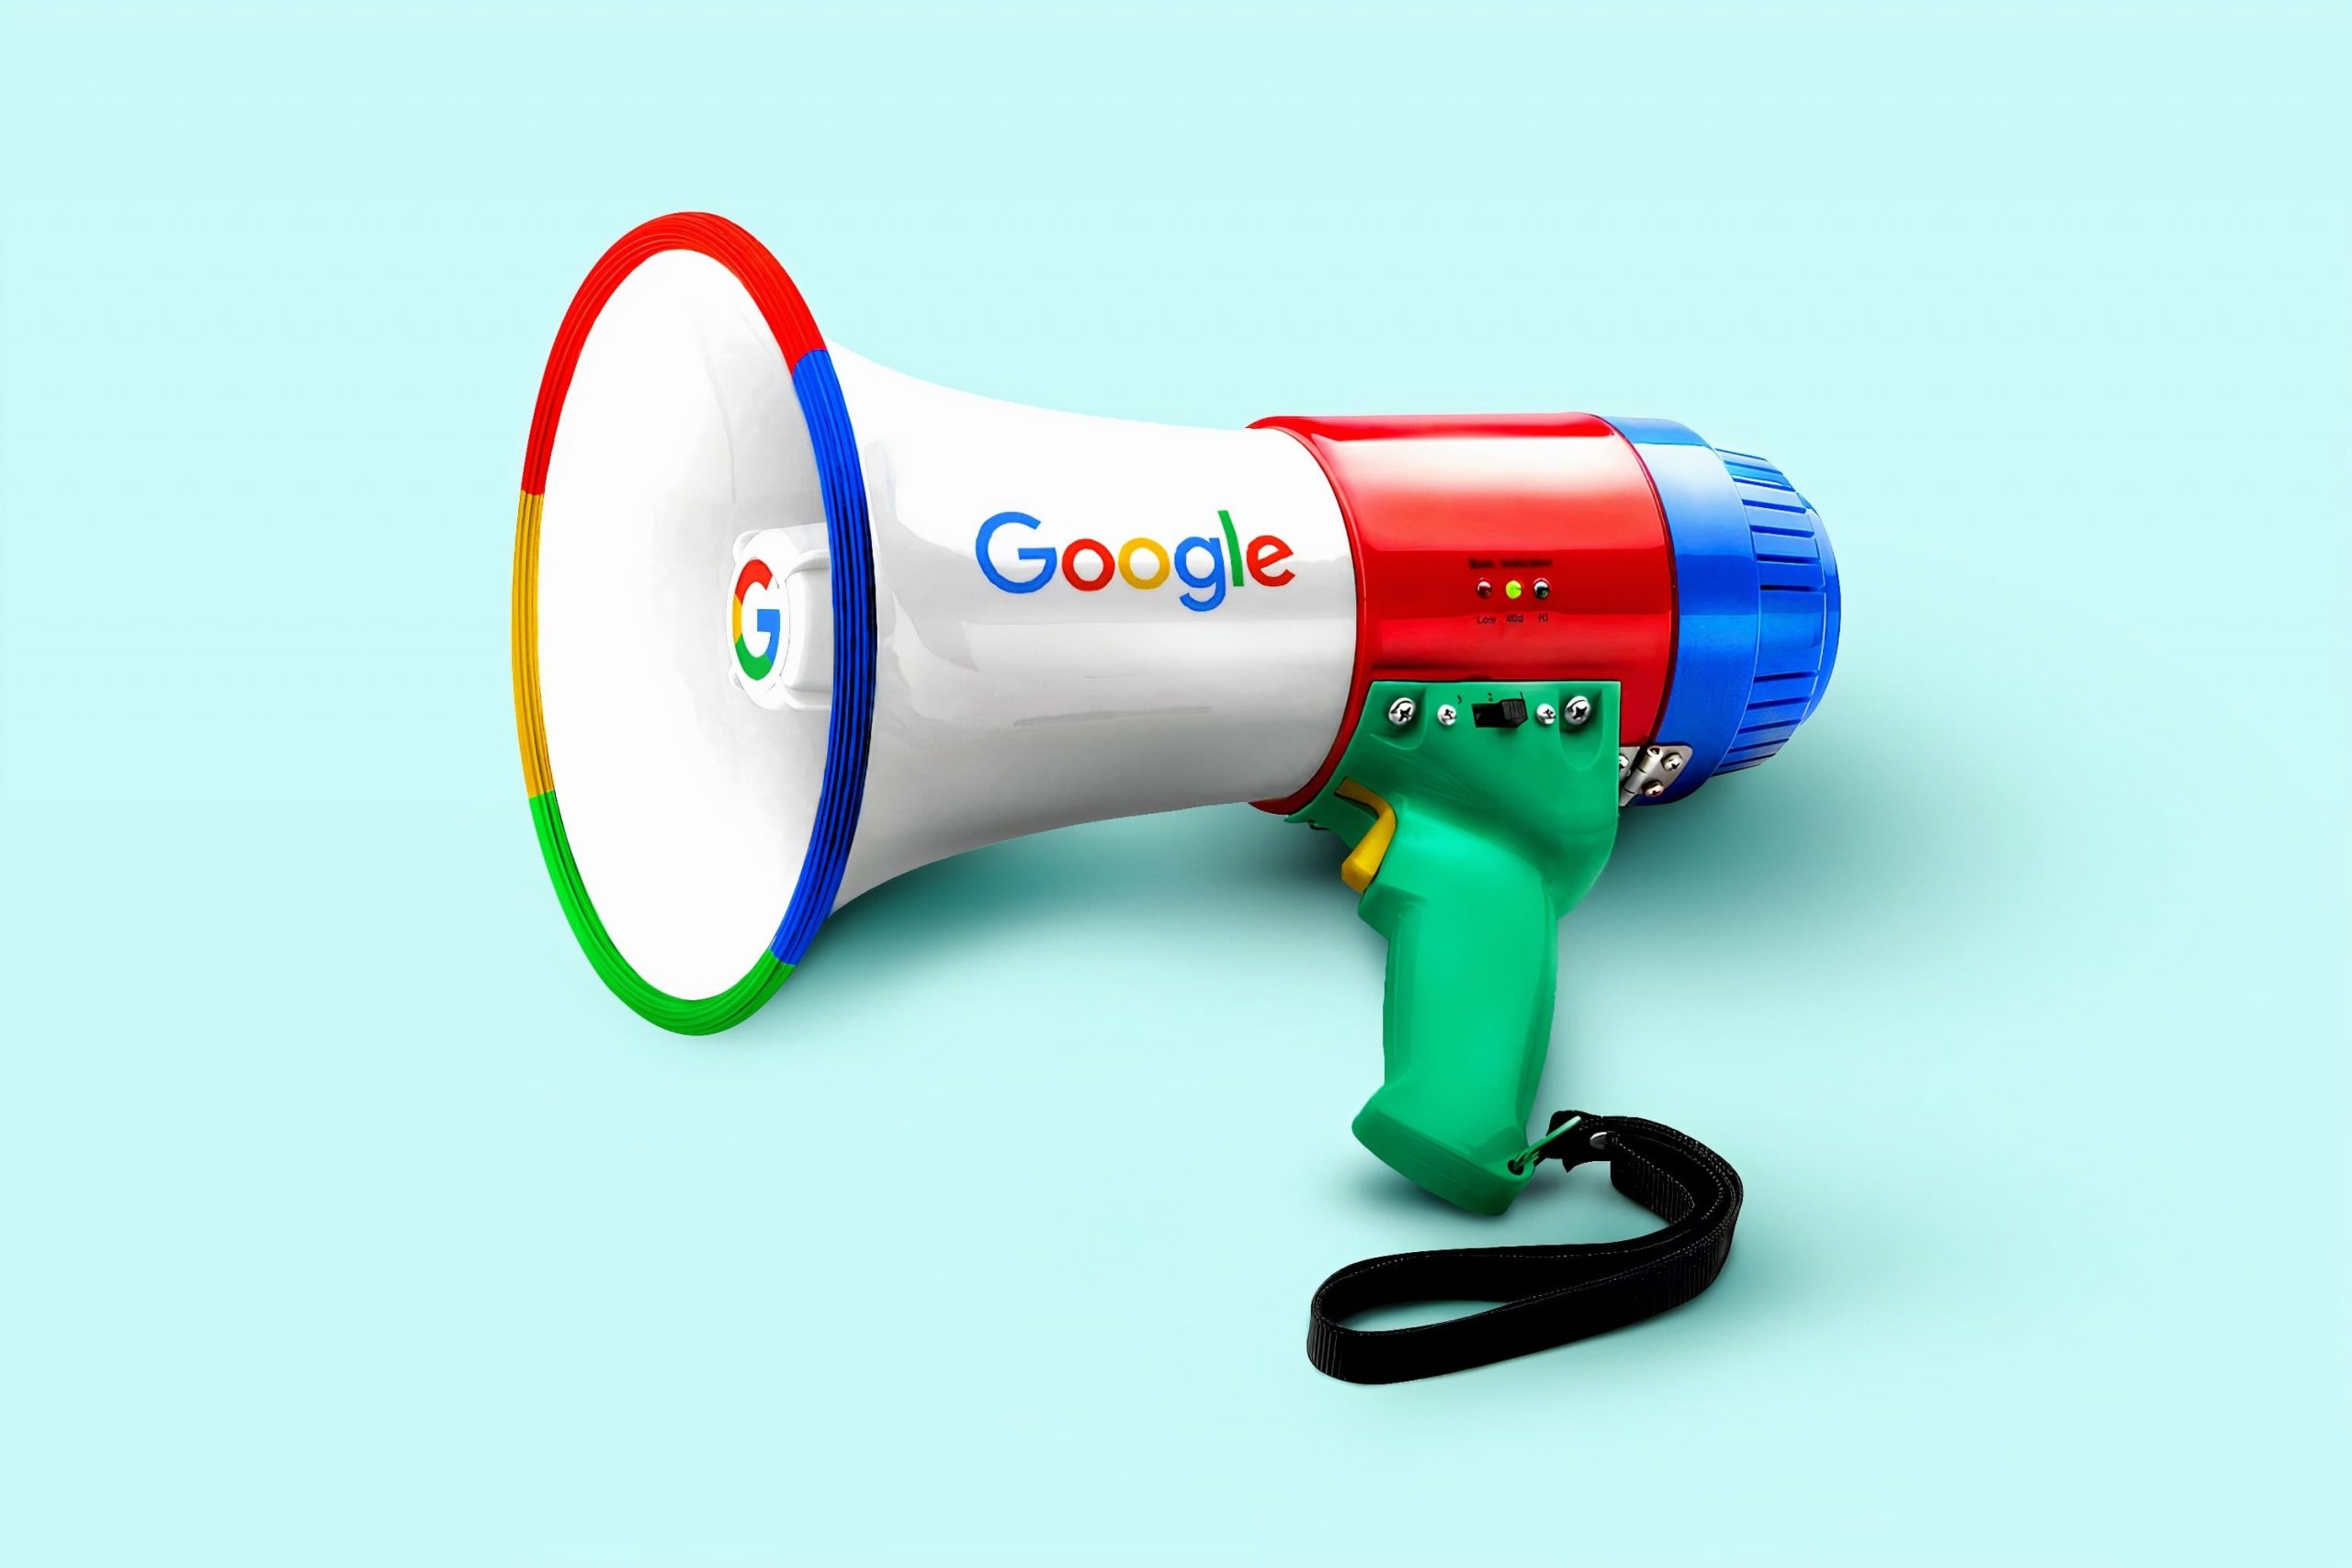 How Does Google Marketing Work?